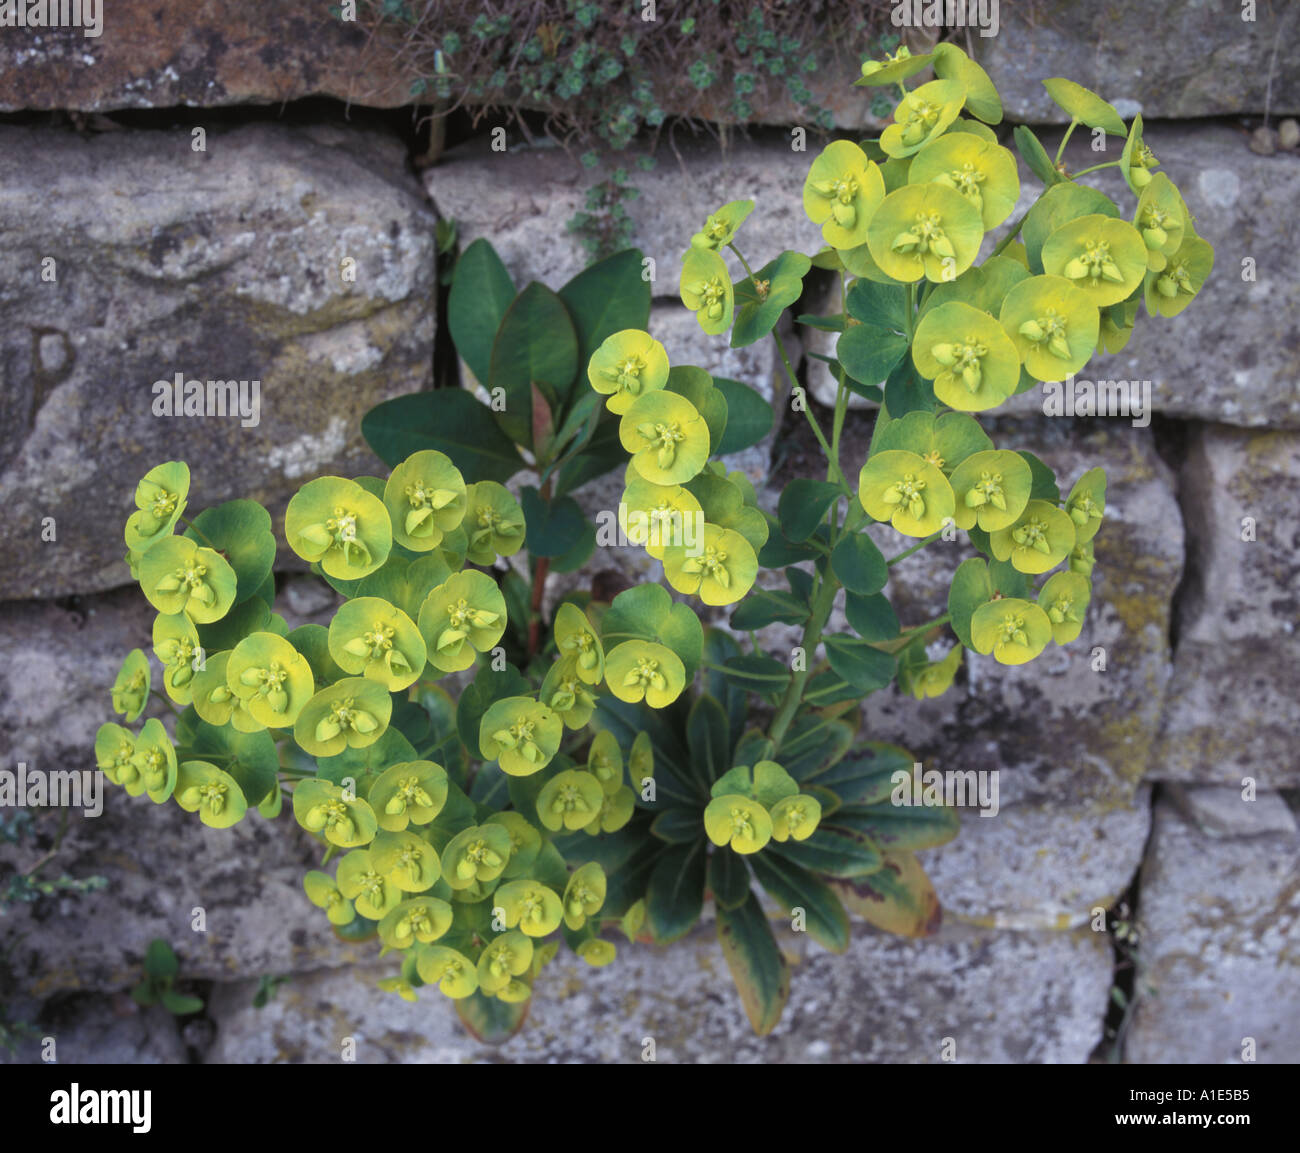 Close-up of Euphorbia amygdaloides var. robbiae thriving in a narrow crack of a beautiful stone garden wall, a testament to nature's resilience Stock Photo